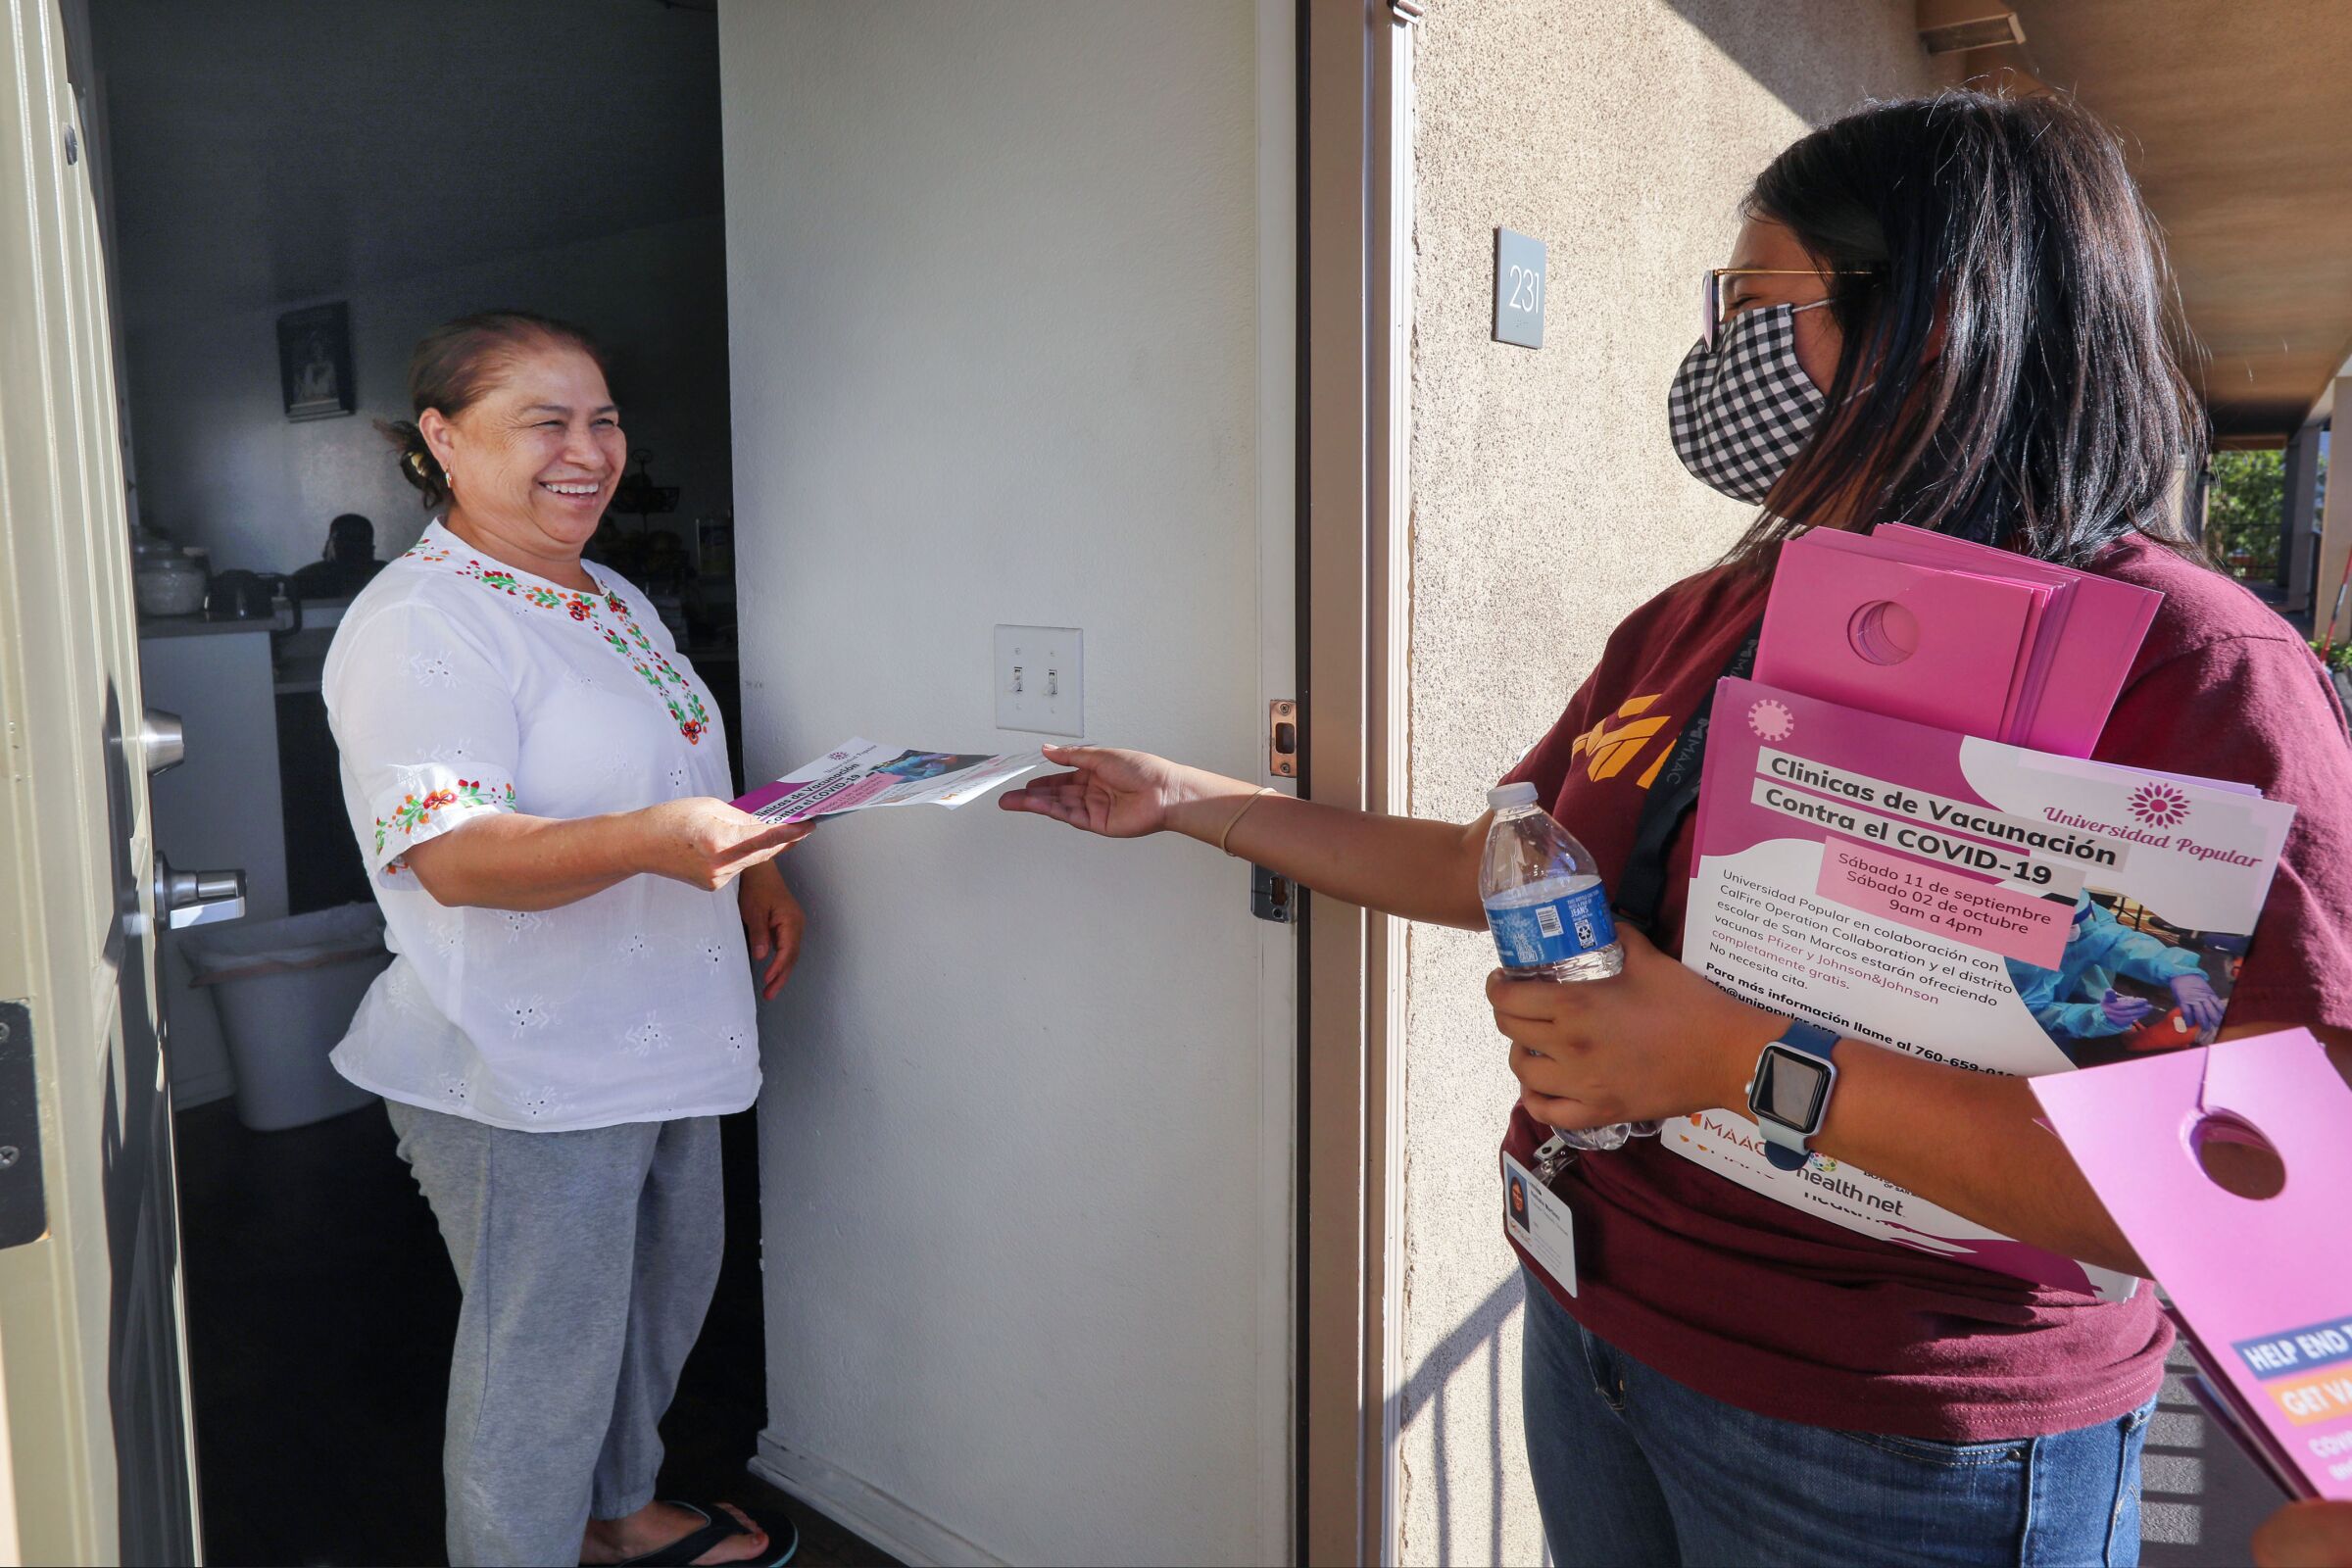 Volunteer Nathalie Martinez gave Catalina Valentine a flyer about the next day's vaccine clinic at San Marcos Elementary